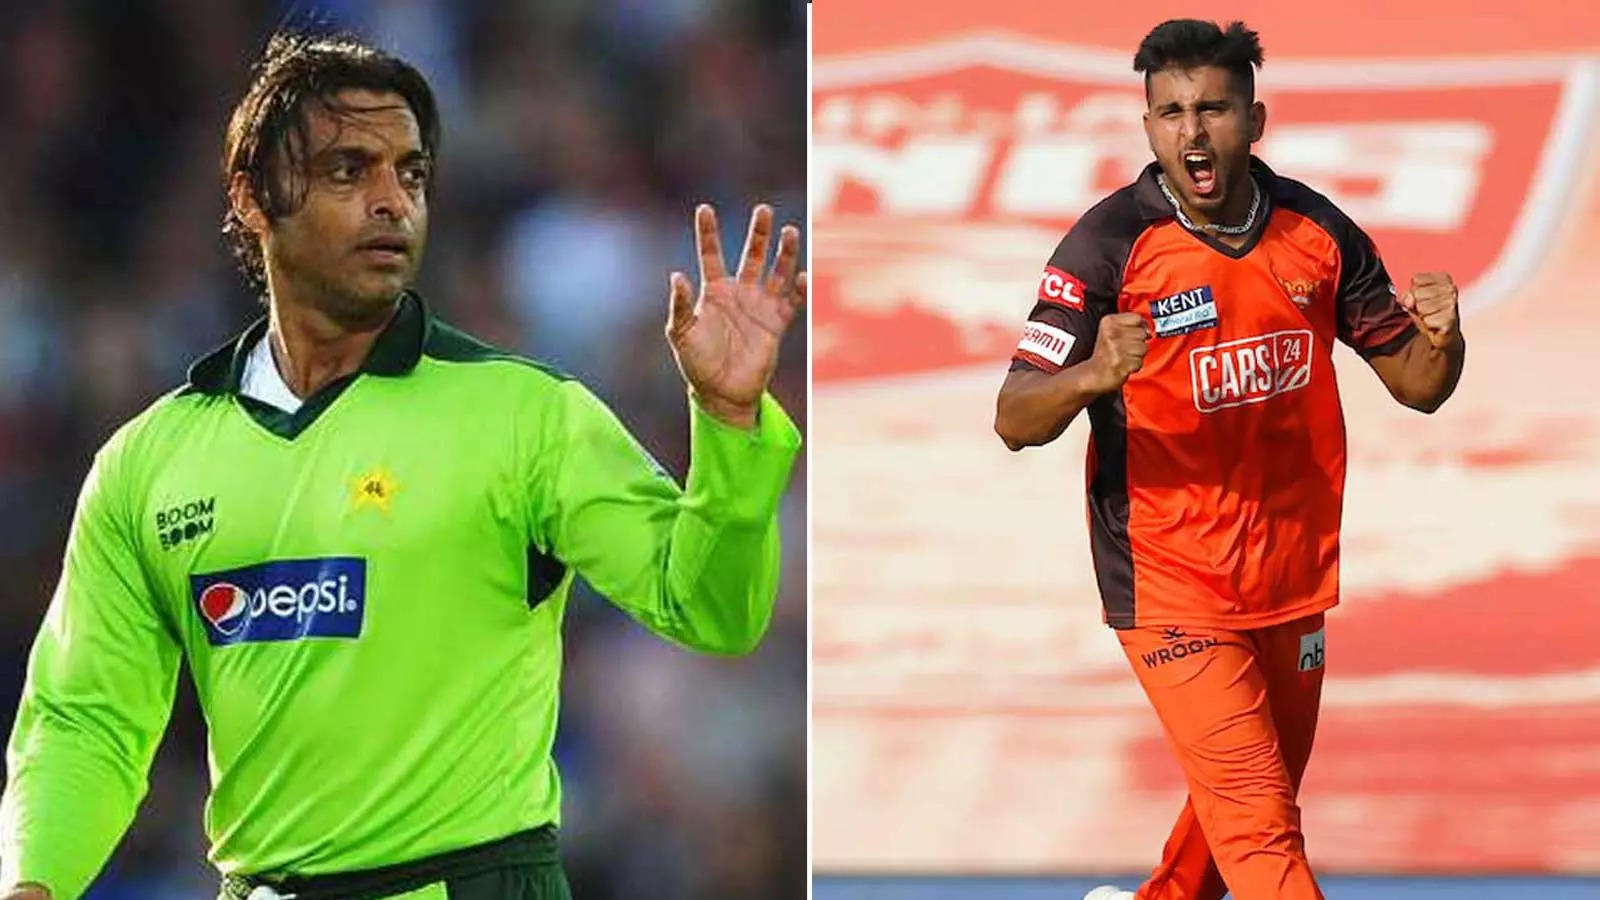 Umran Malik has been compared to Shoaib Akhtar due to his express pace